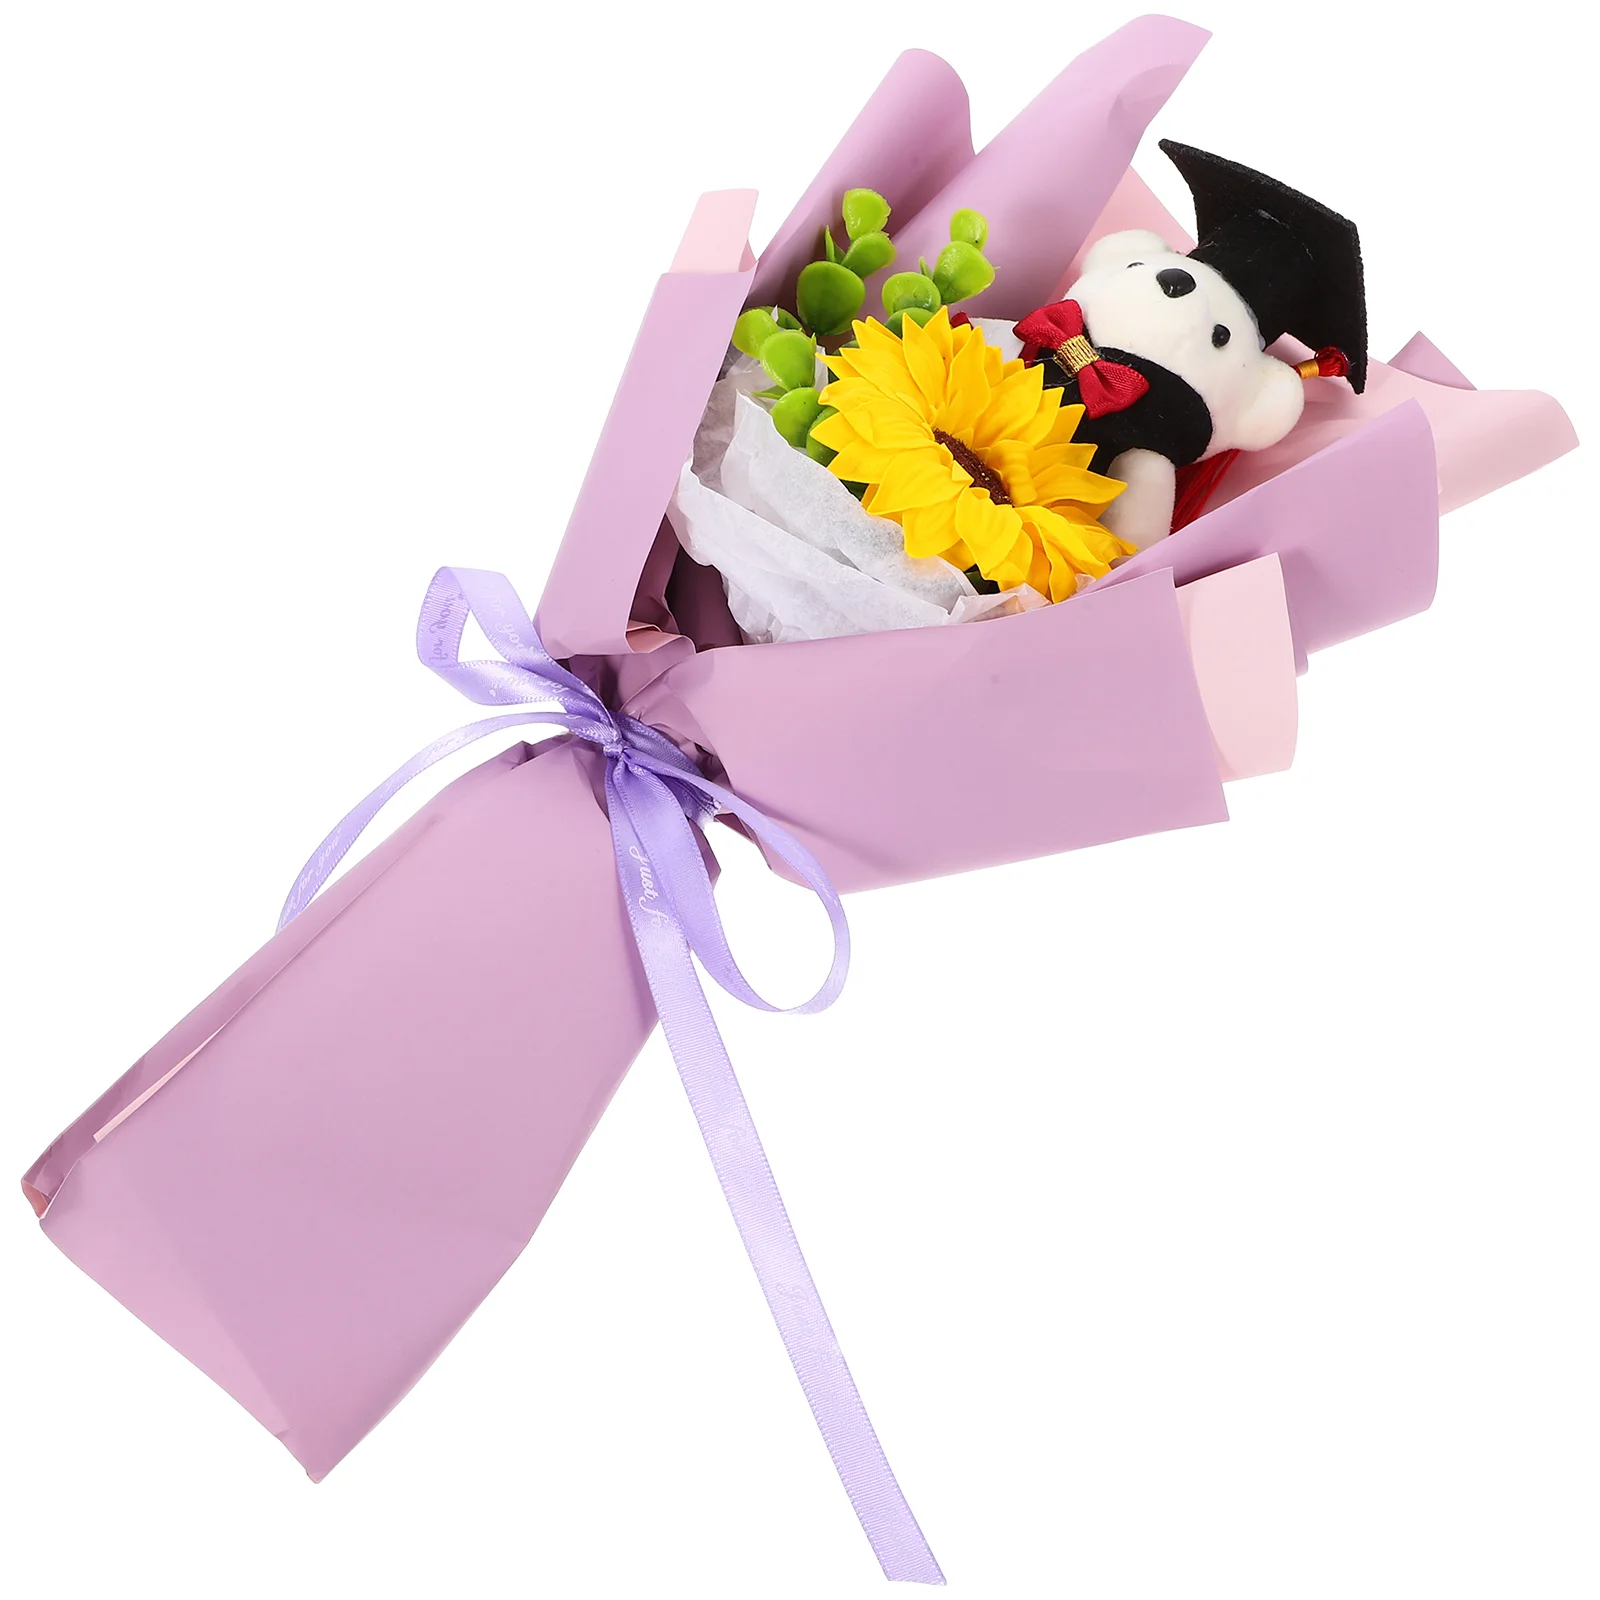 

Dr Bear Bouquet Flowers Banquet Gift Decorate Chic Graduation Cloth Present Figurine Gifts